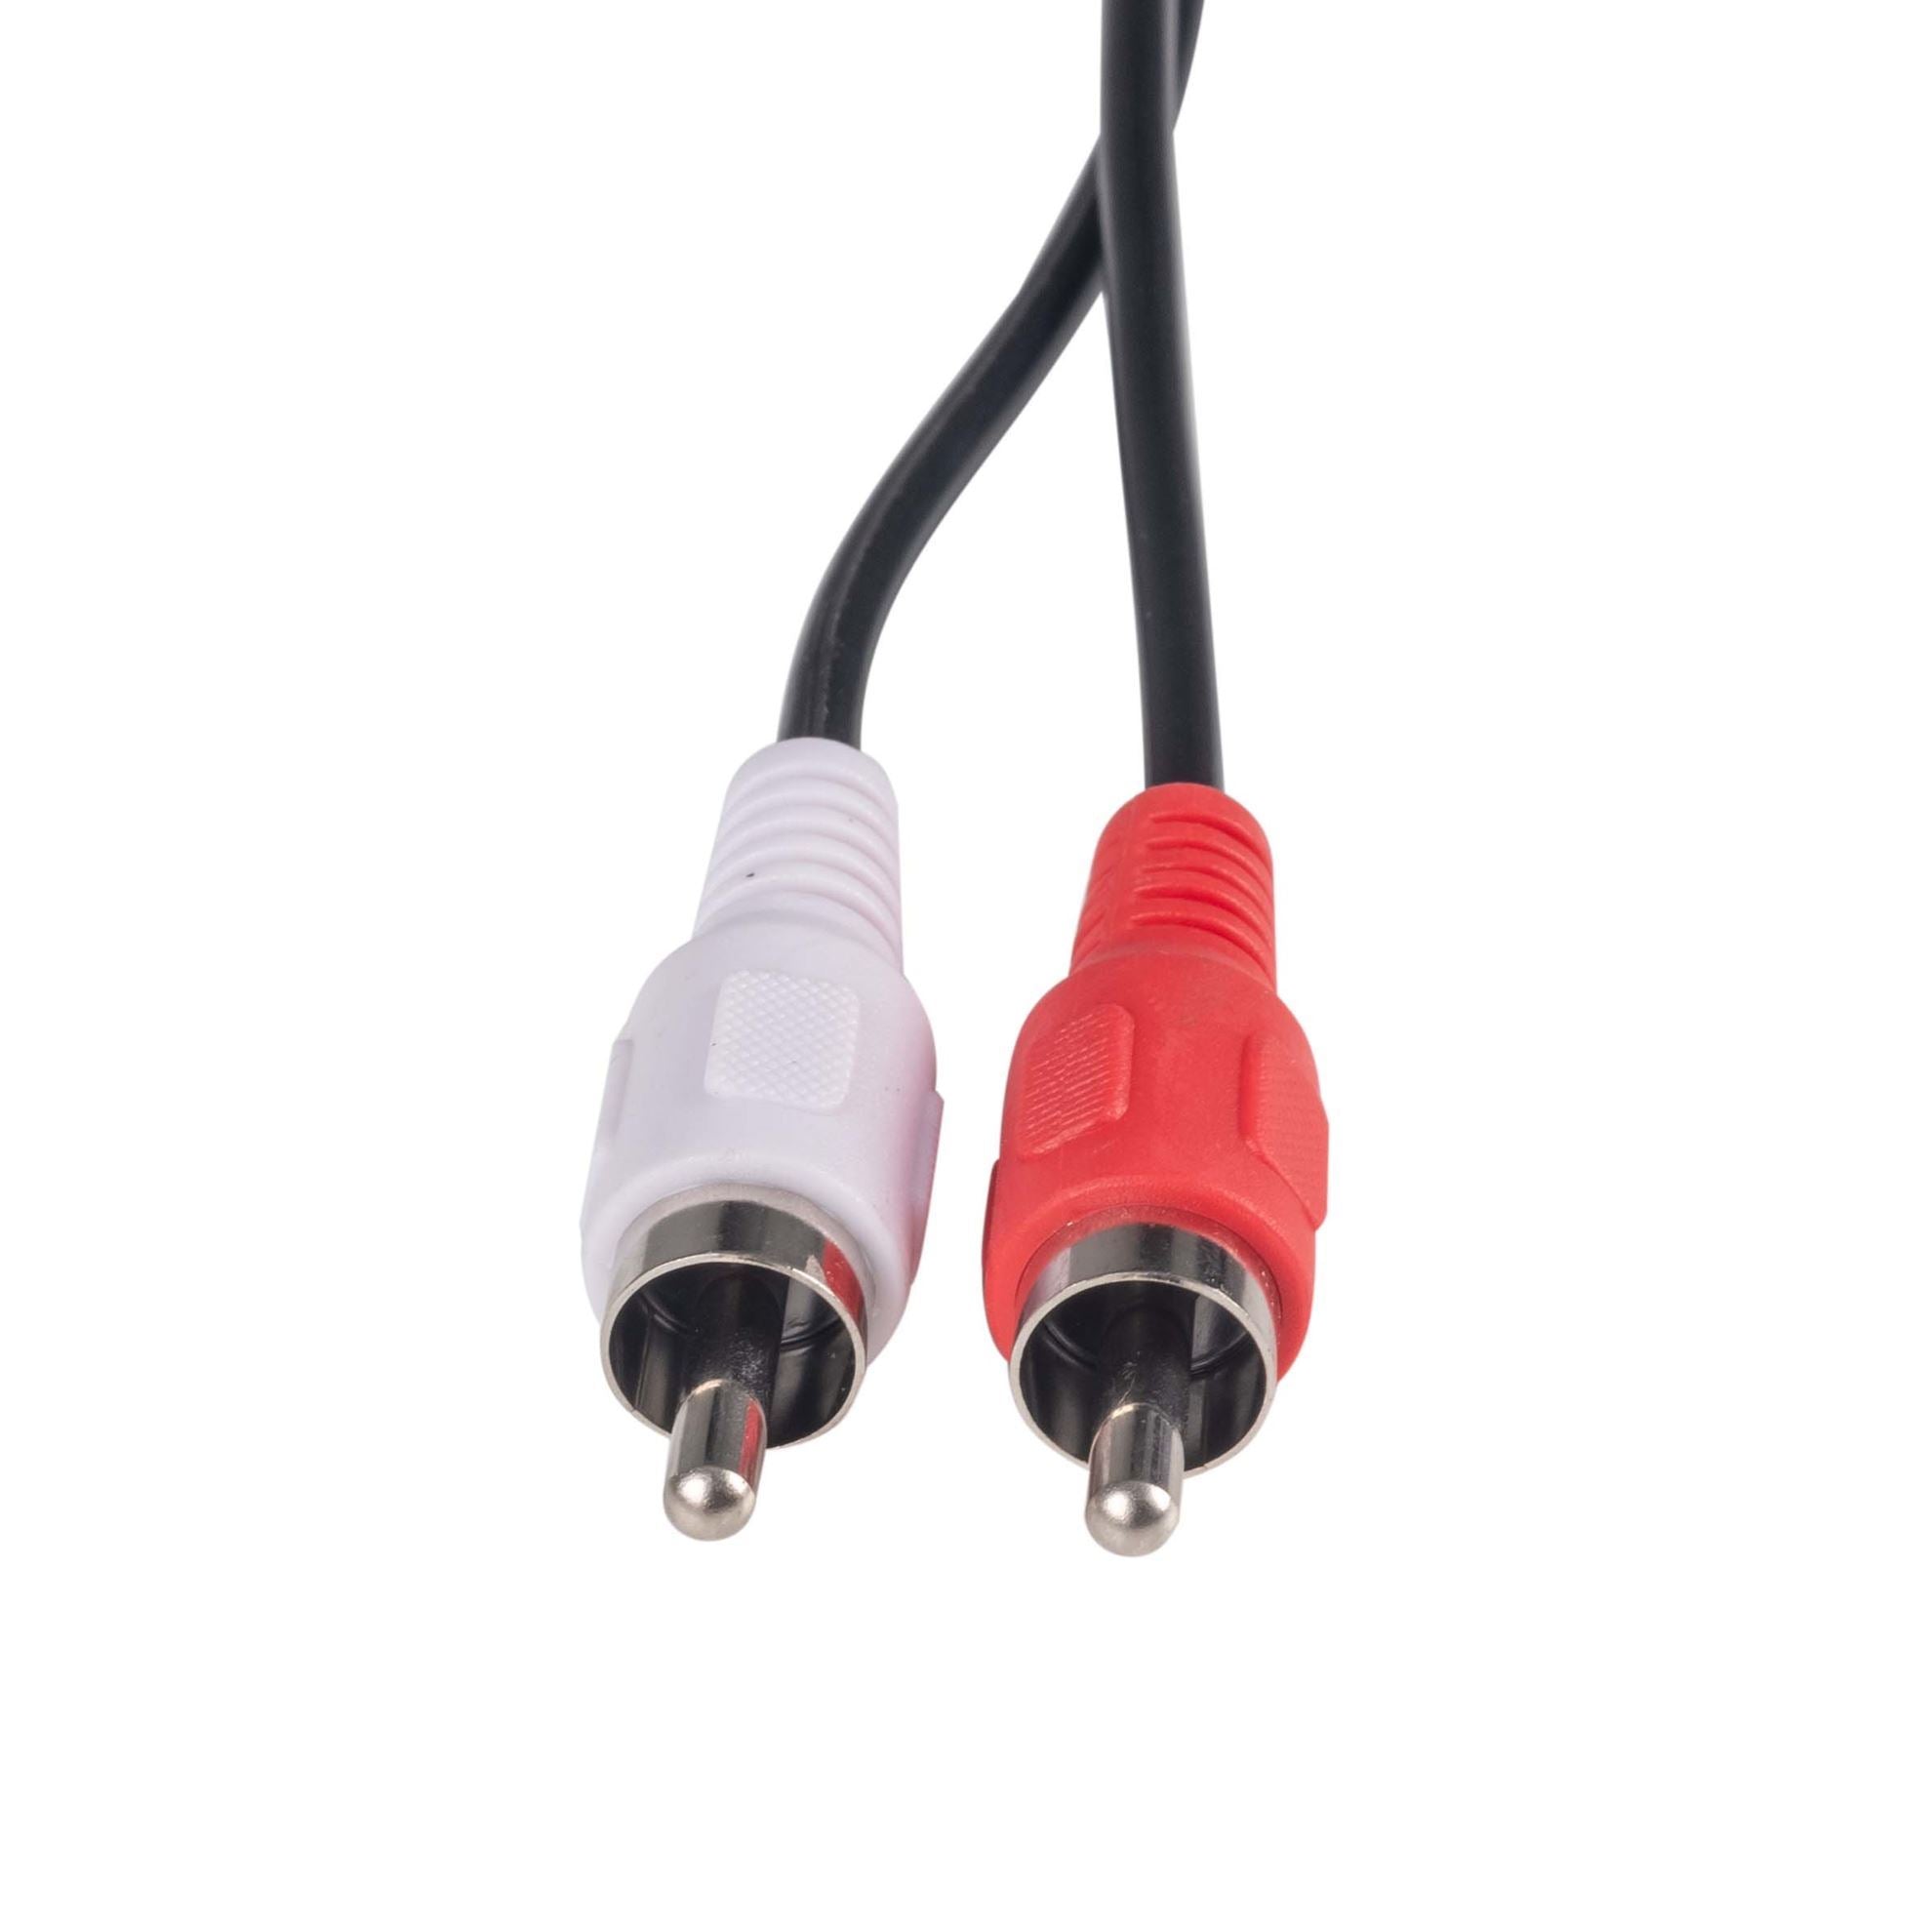 DYNAMIX_15m_RCA_Audio_Cable_2_RCA_to_2_RCA_Plugs,_Coloured_Red_&_White 387